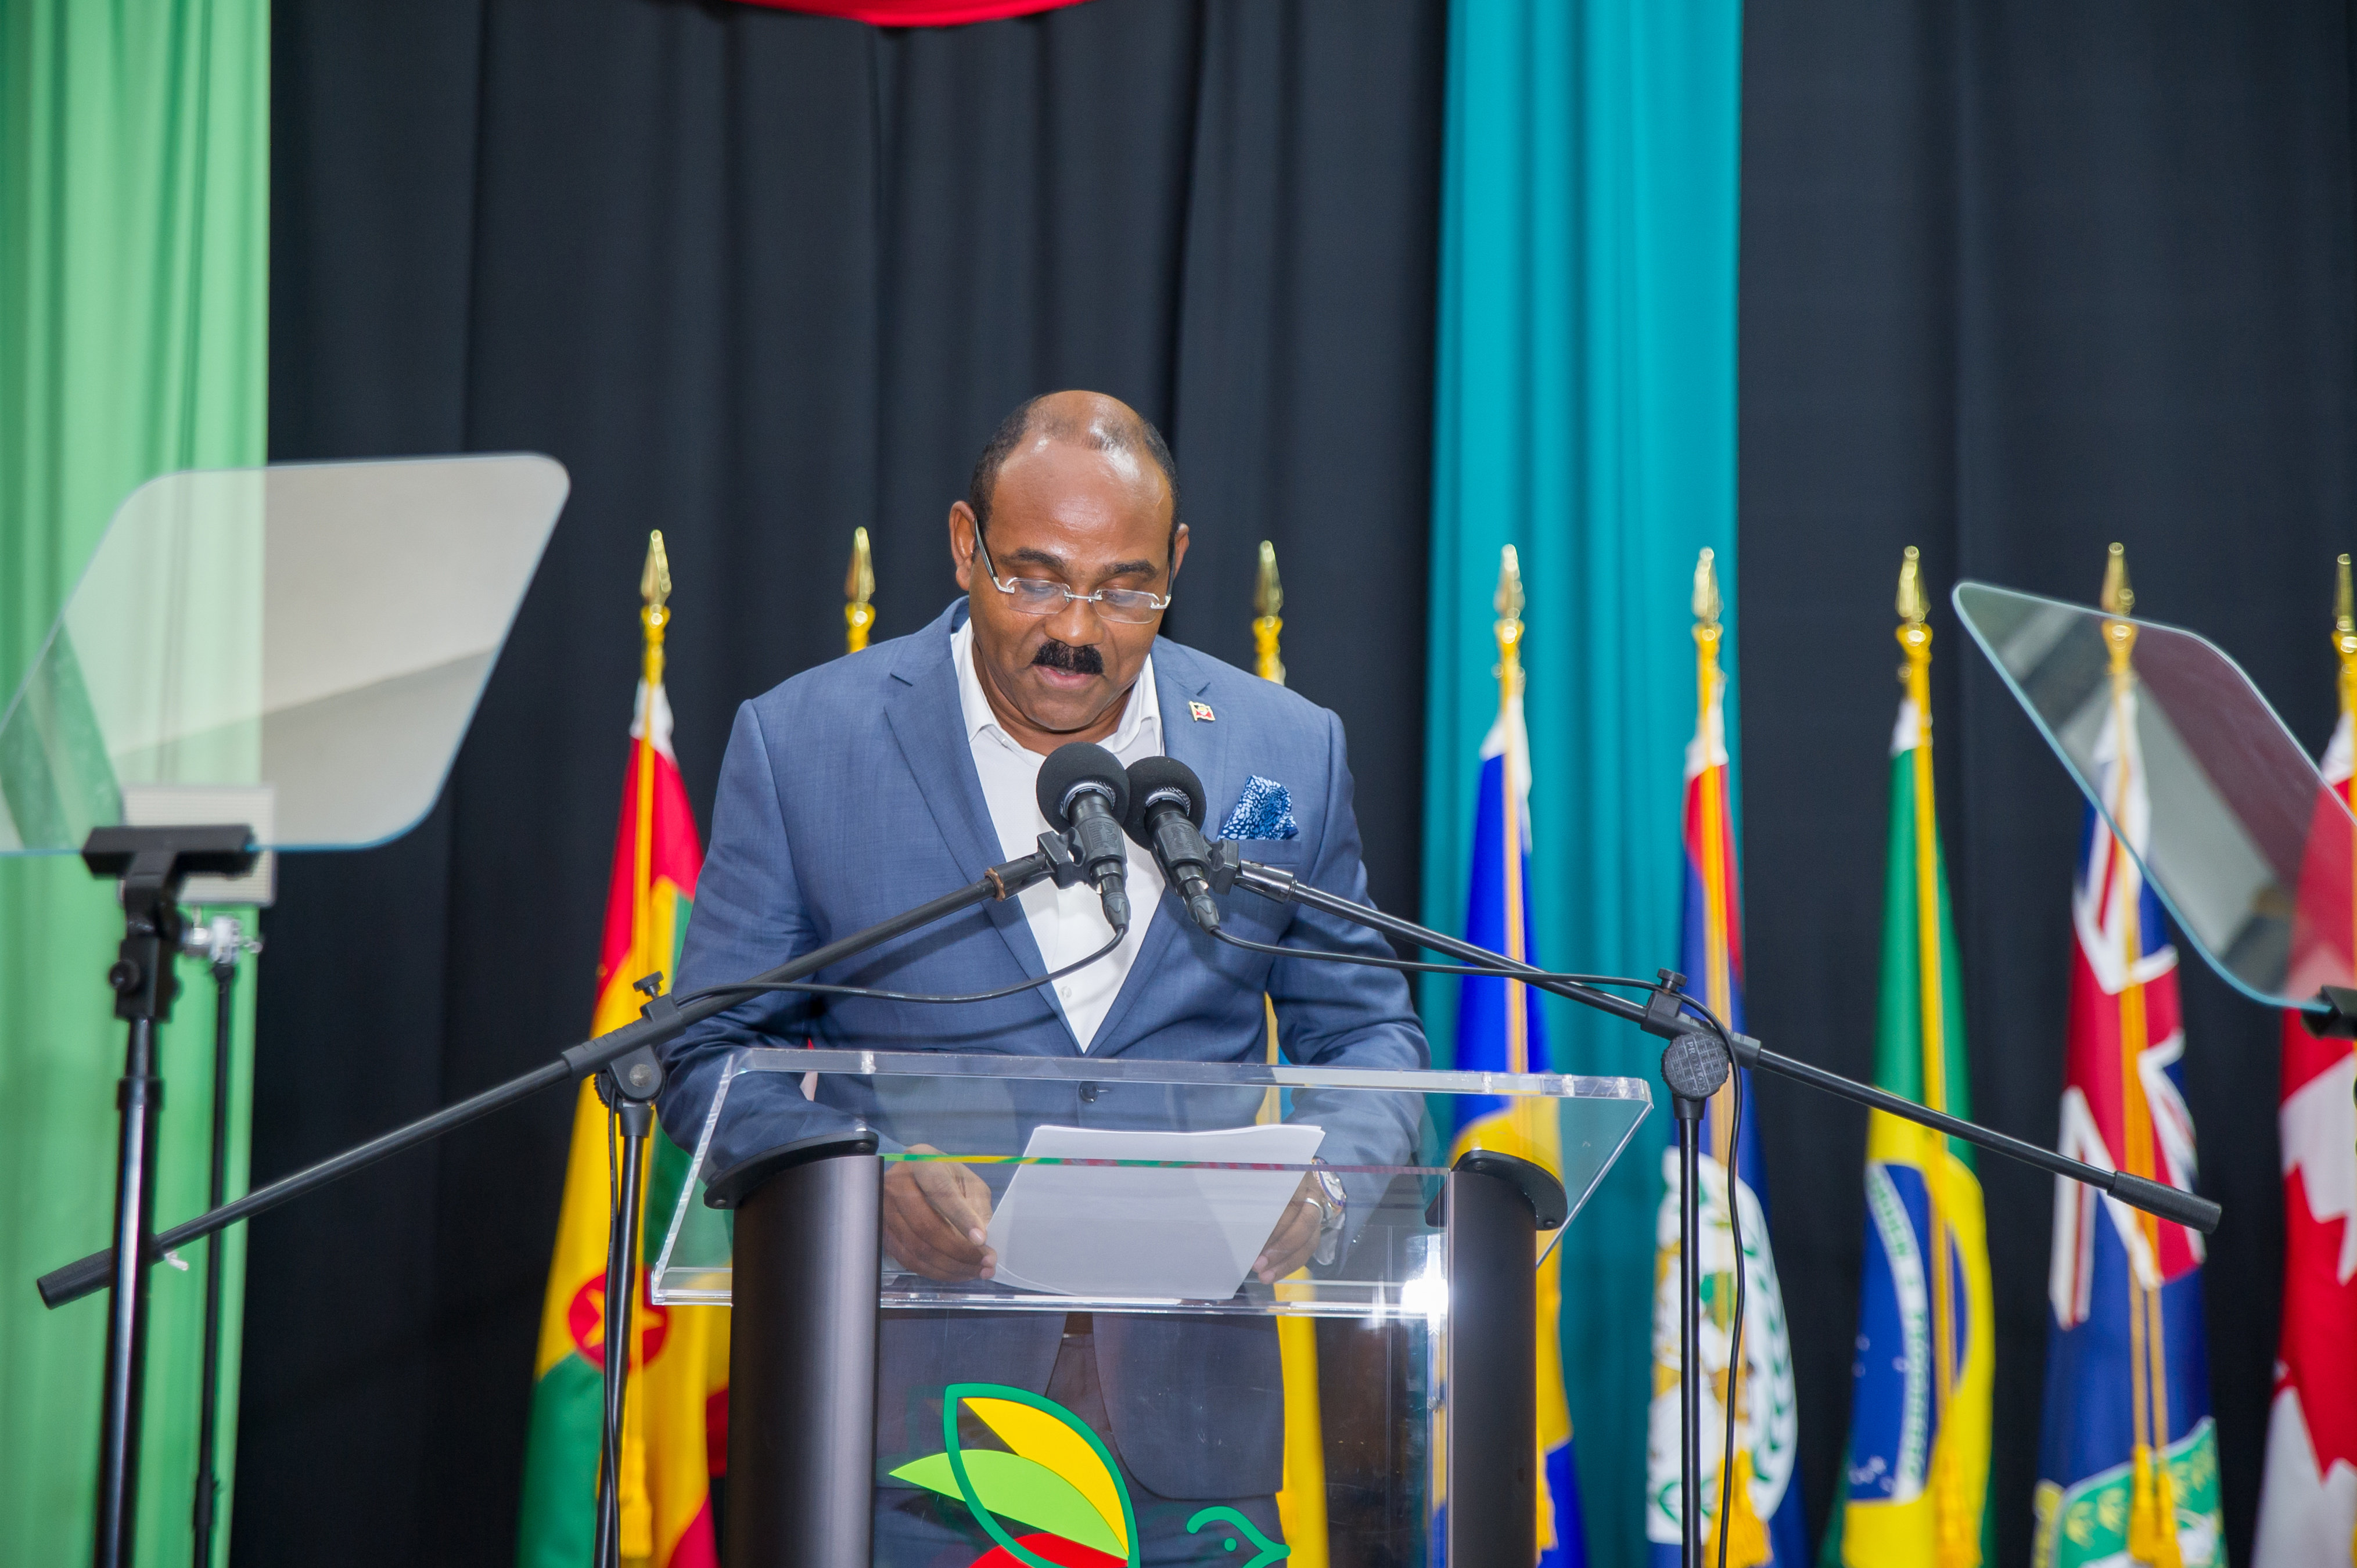 The Hon. Gaston Browne, Prime Minister of Antigua and Barbuda, delivers remarks during CDB’s Annual Meeting in Grenada on May 30, 2018.